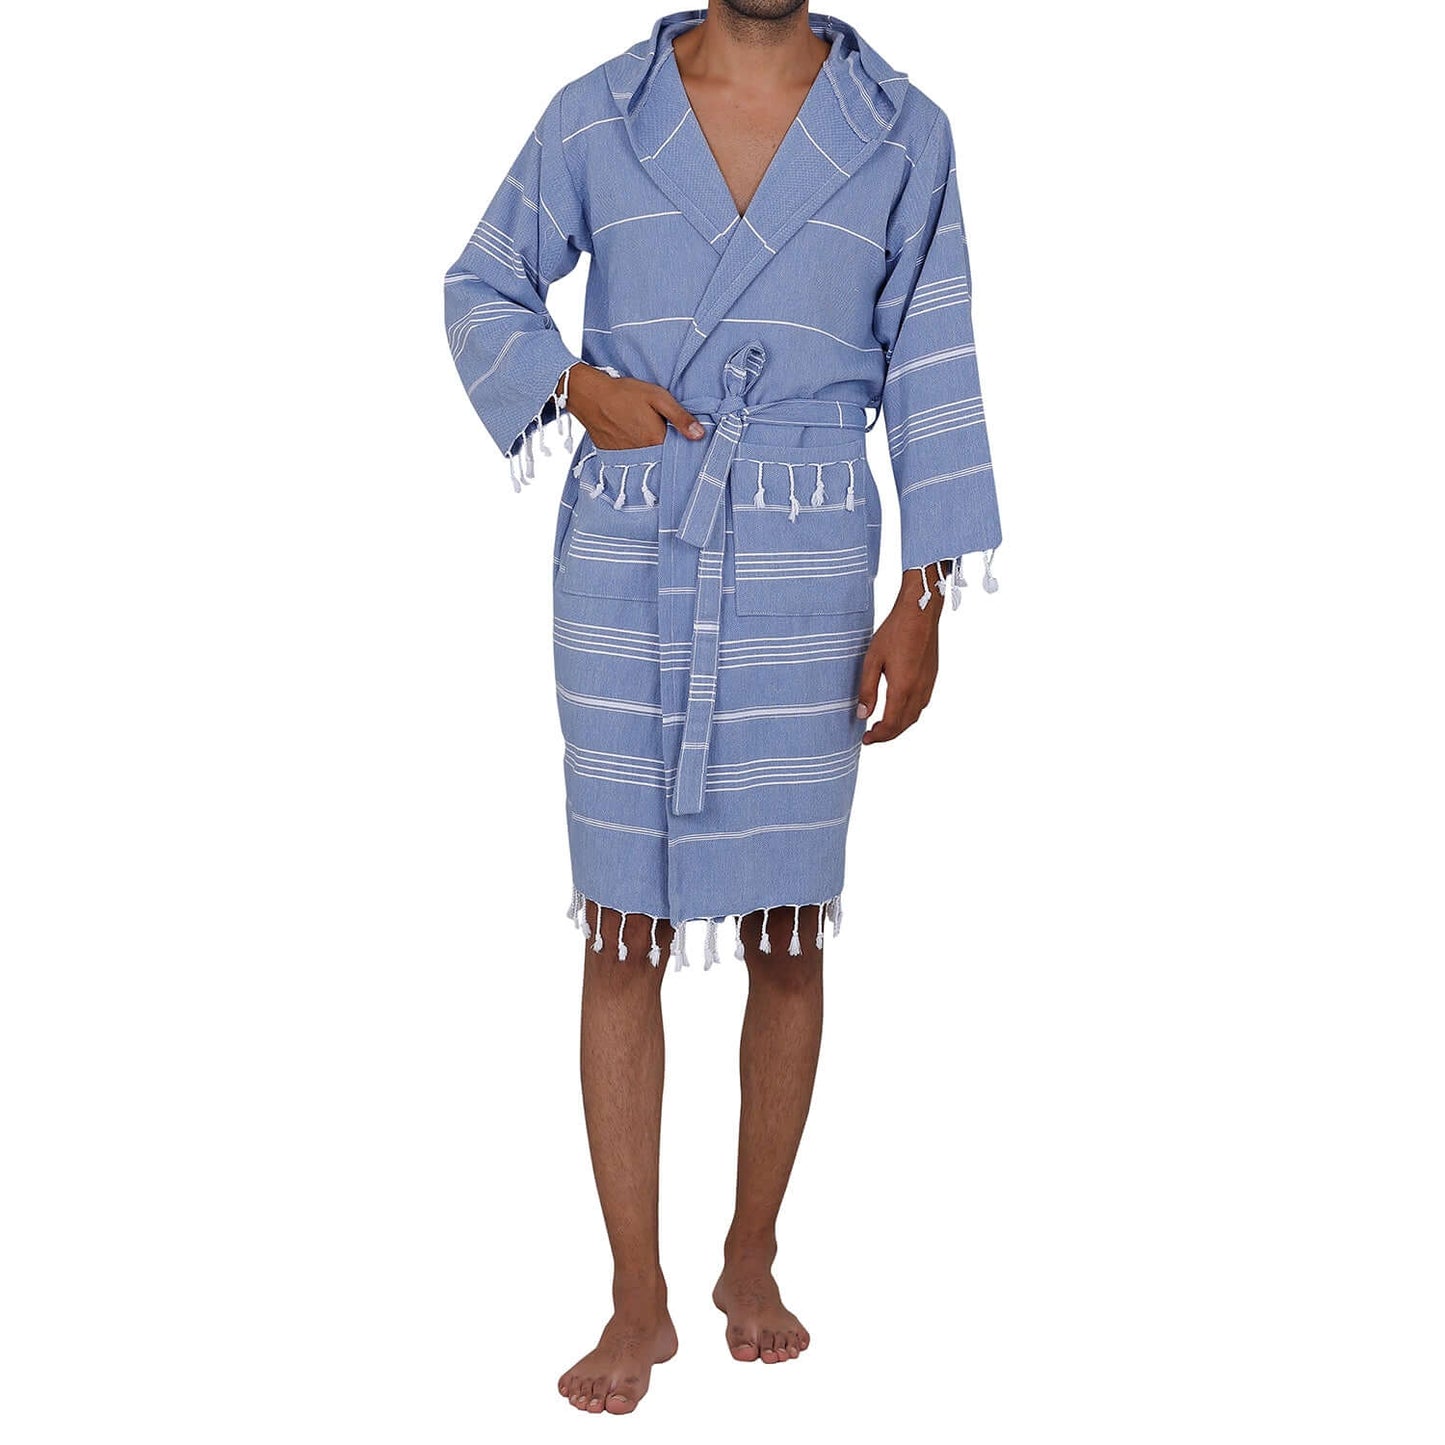 Man wearing Loom Legacy xsmall/small blue bathrobe with white stripes and fringe detailing at the bottom.